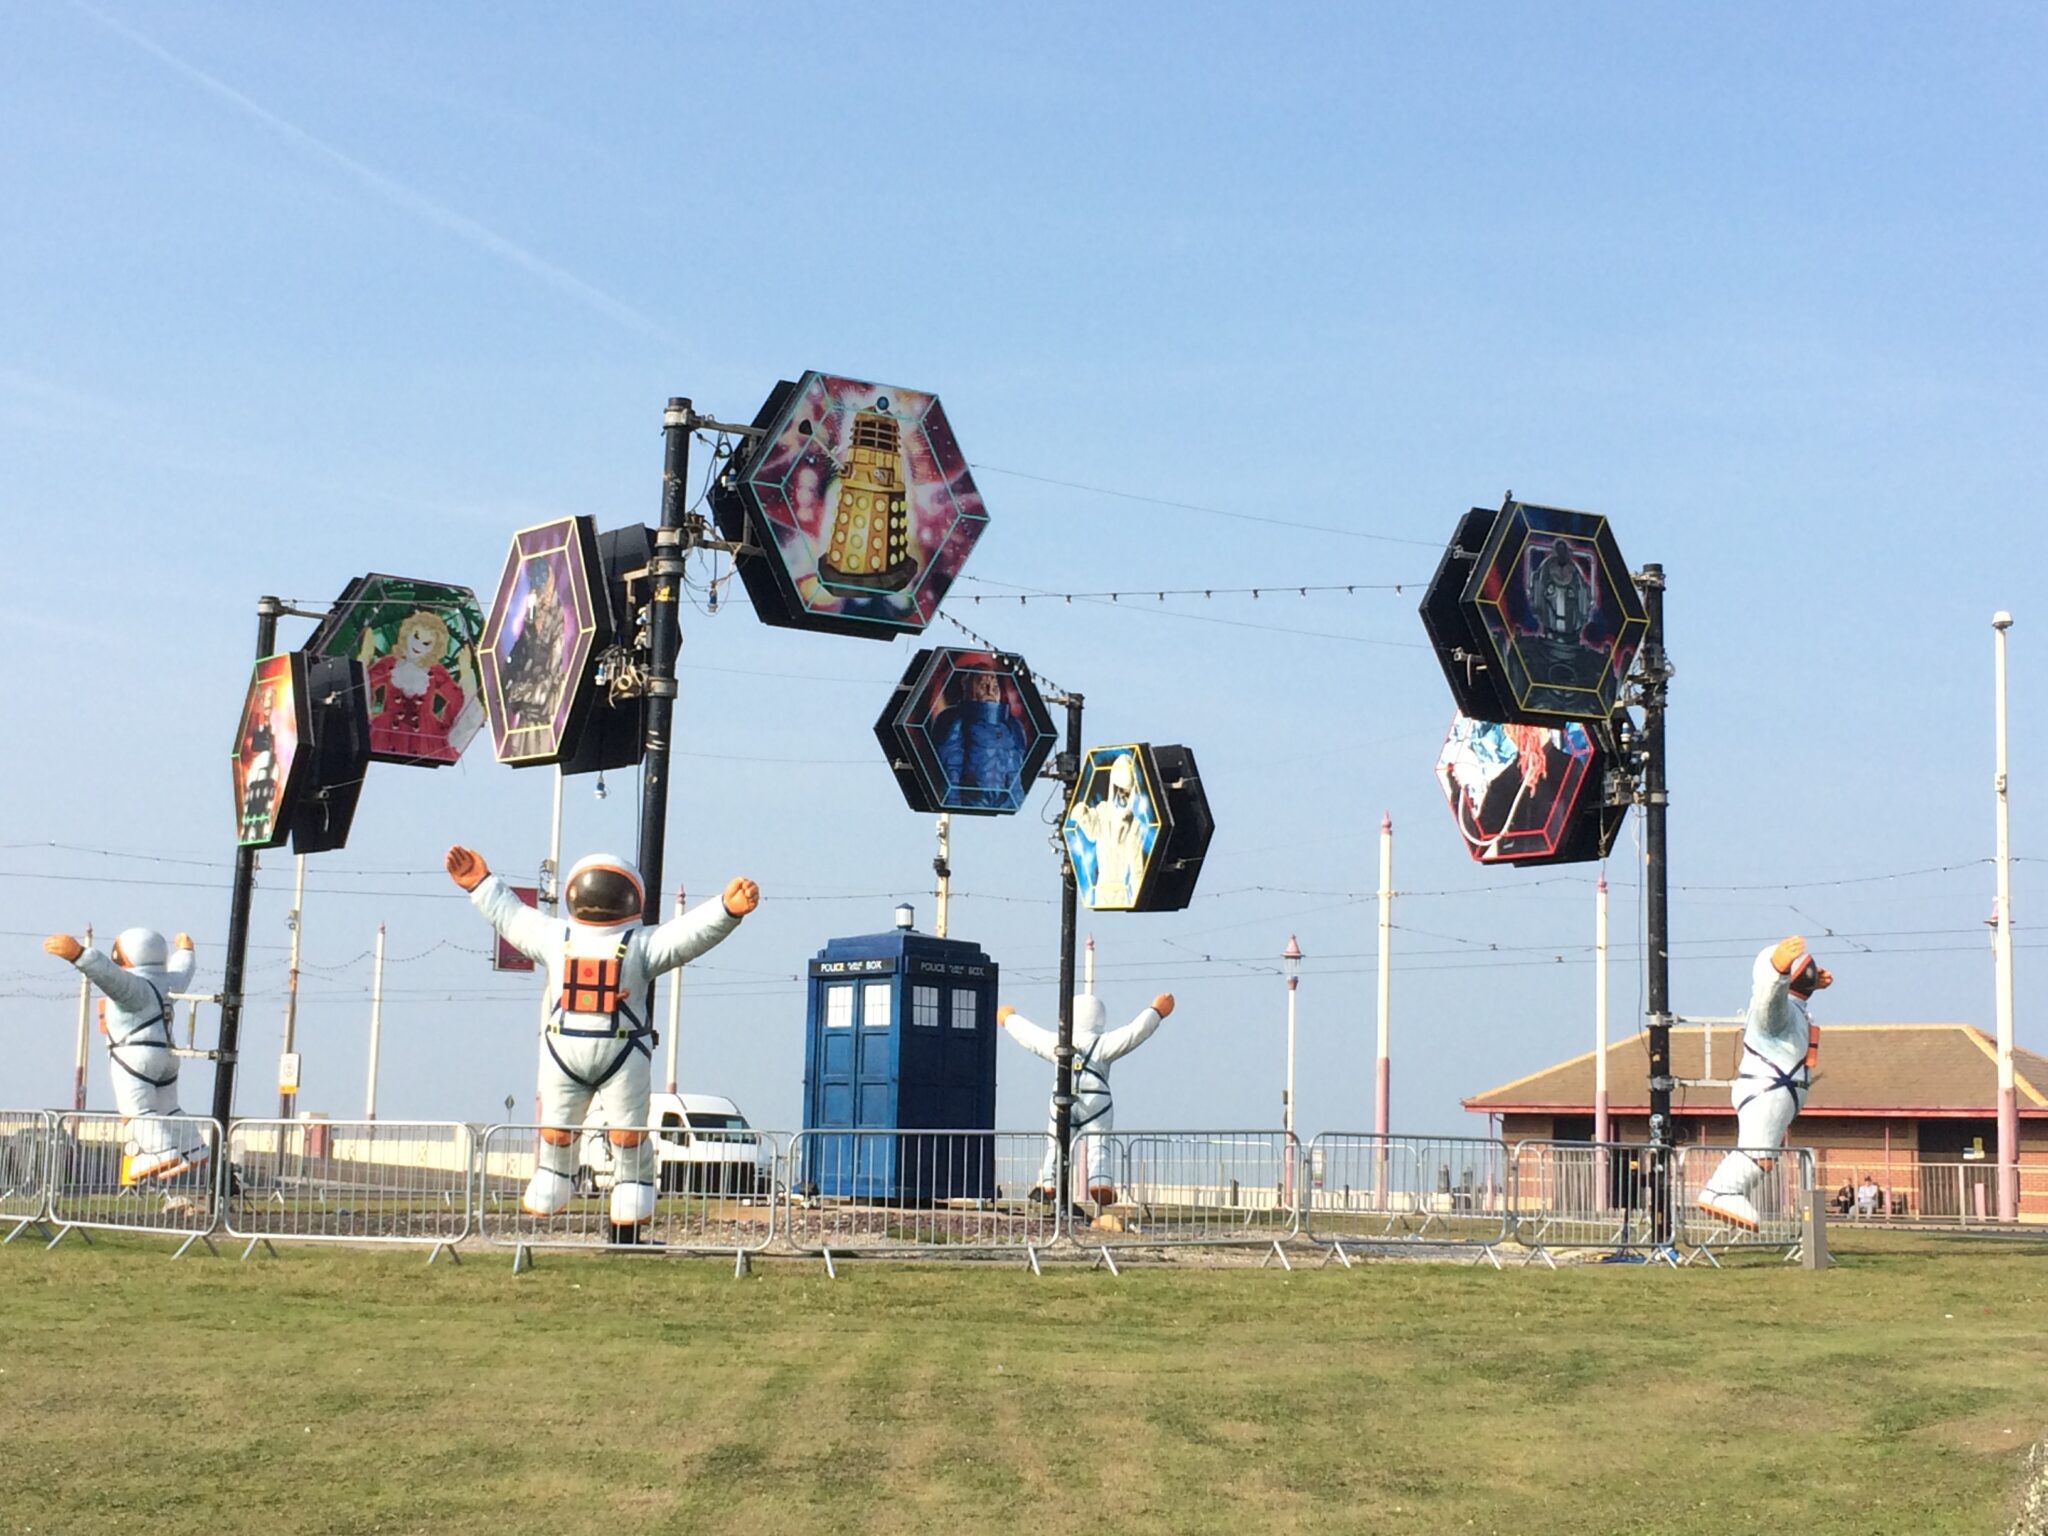 Dr Who display at Gynn Roundabout in 2014